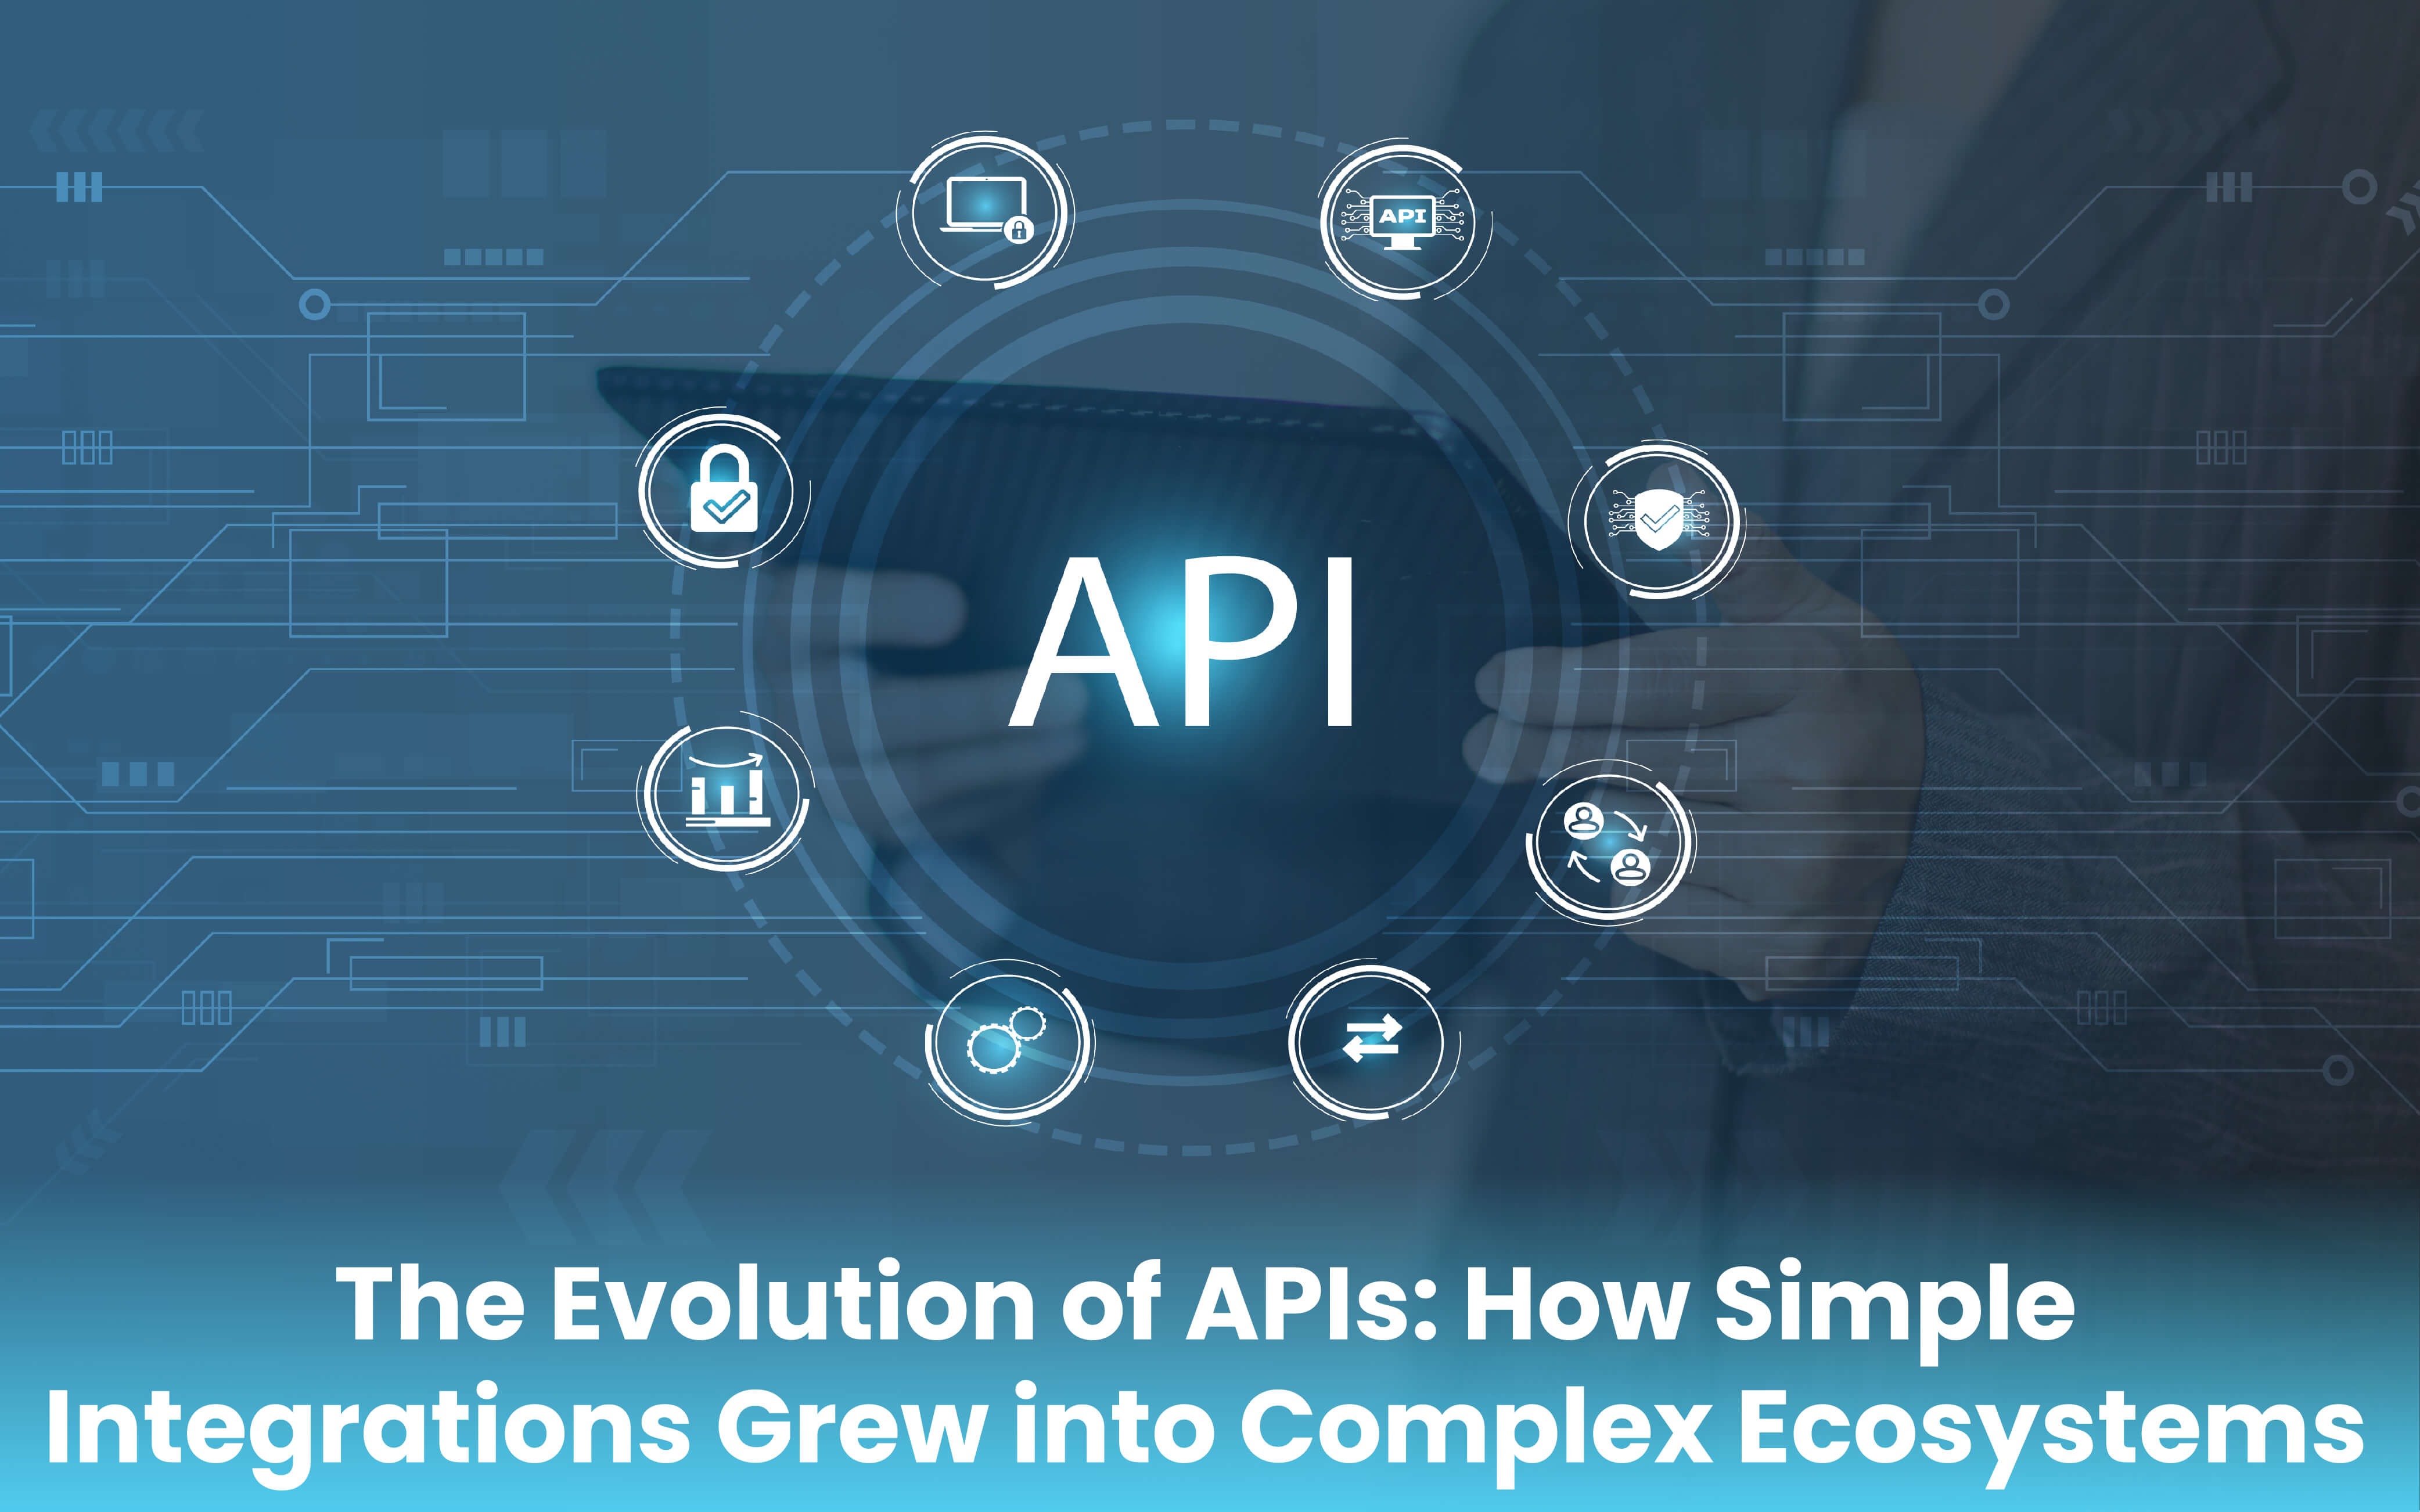 The Evolution of APIs: How Simple Integrations Grew into Complex Ecosystems